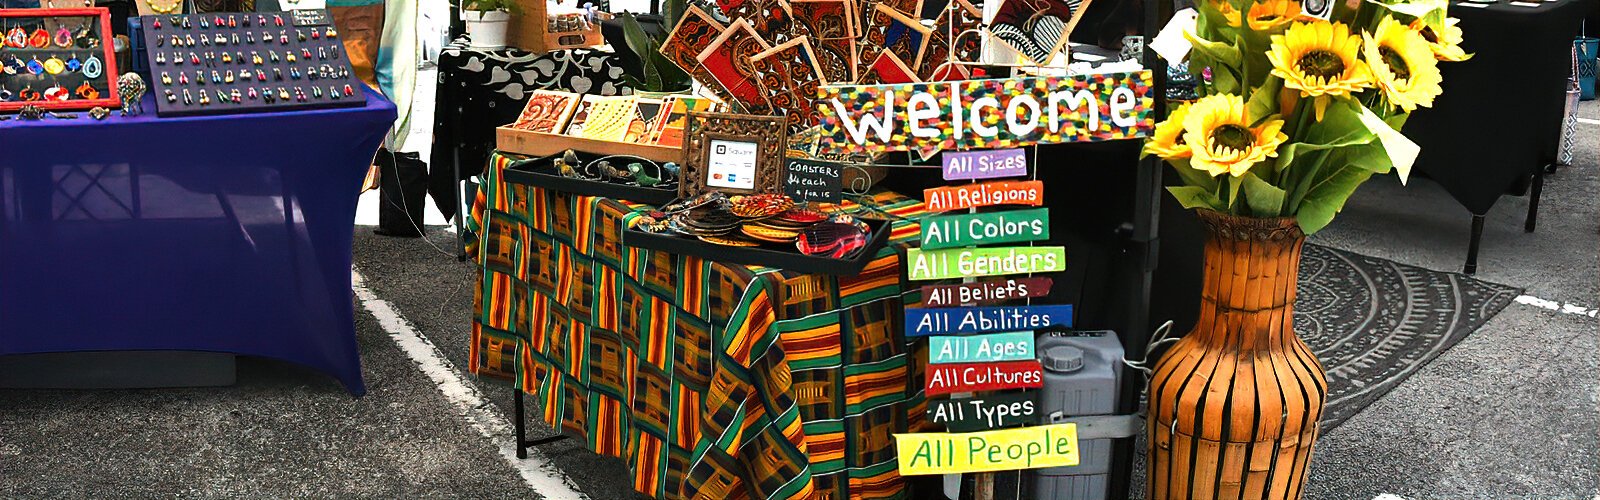 Jacaranda Hill, of St Petersburg, features handcrafted African arts and crafts, and embraces the South African principle of UBUNTU, meaning “I am because we are," the African philosophy of oneness and interconnectedness of all life.